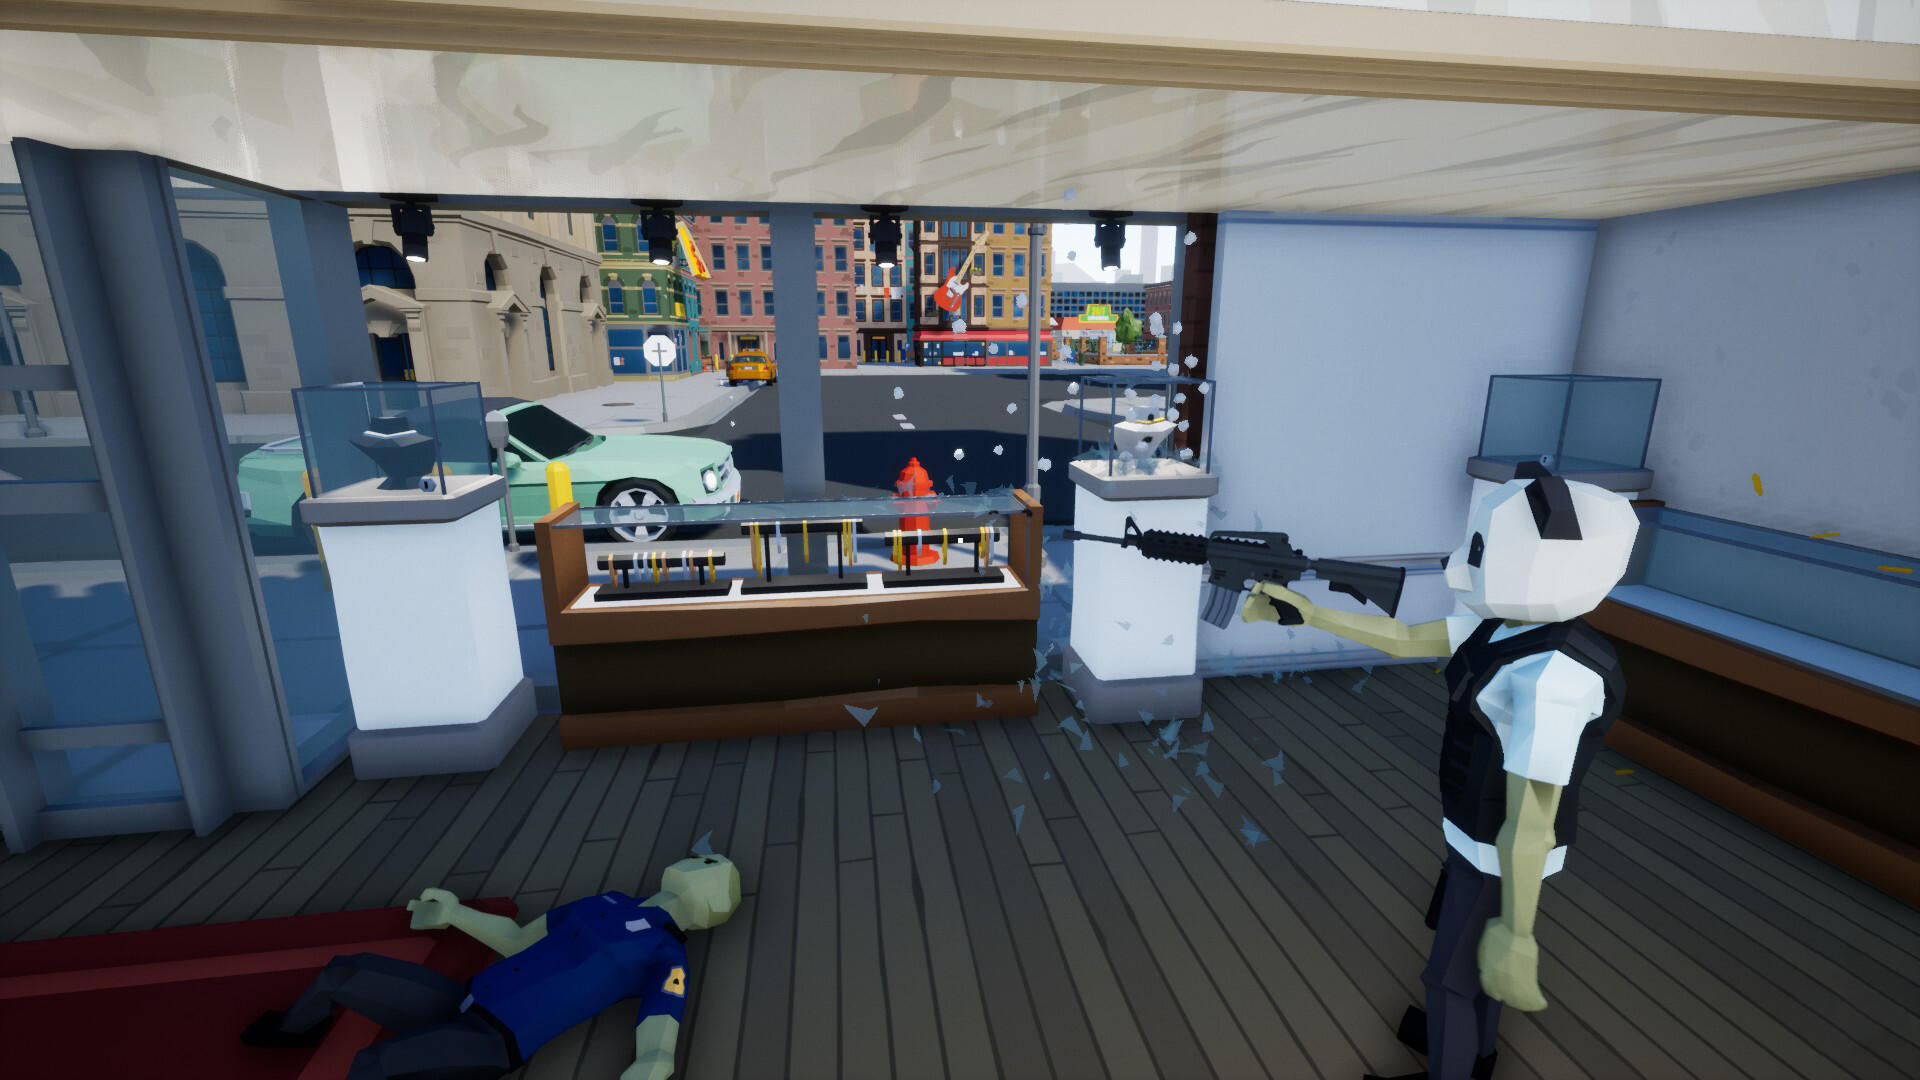 Screenshot of One-armed robber